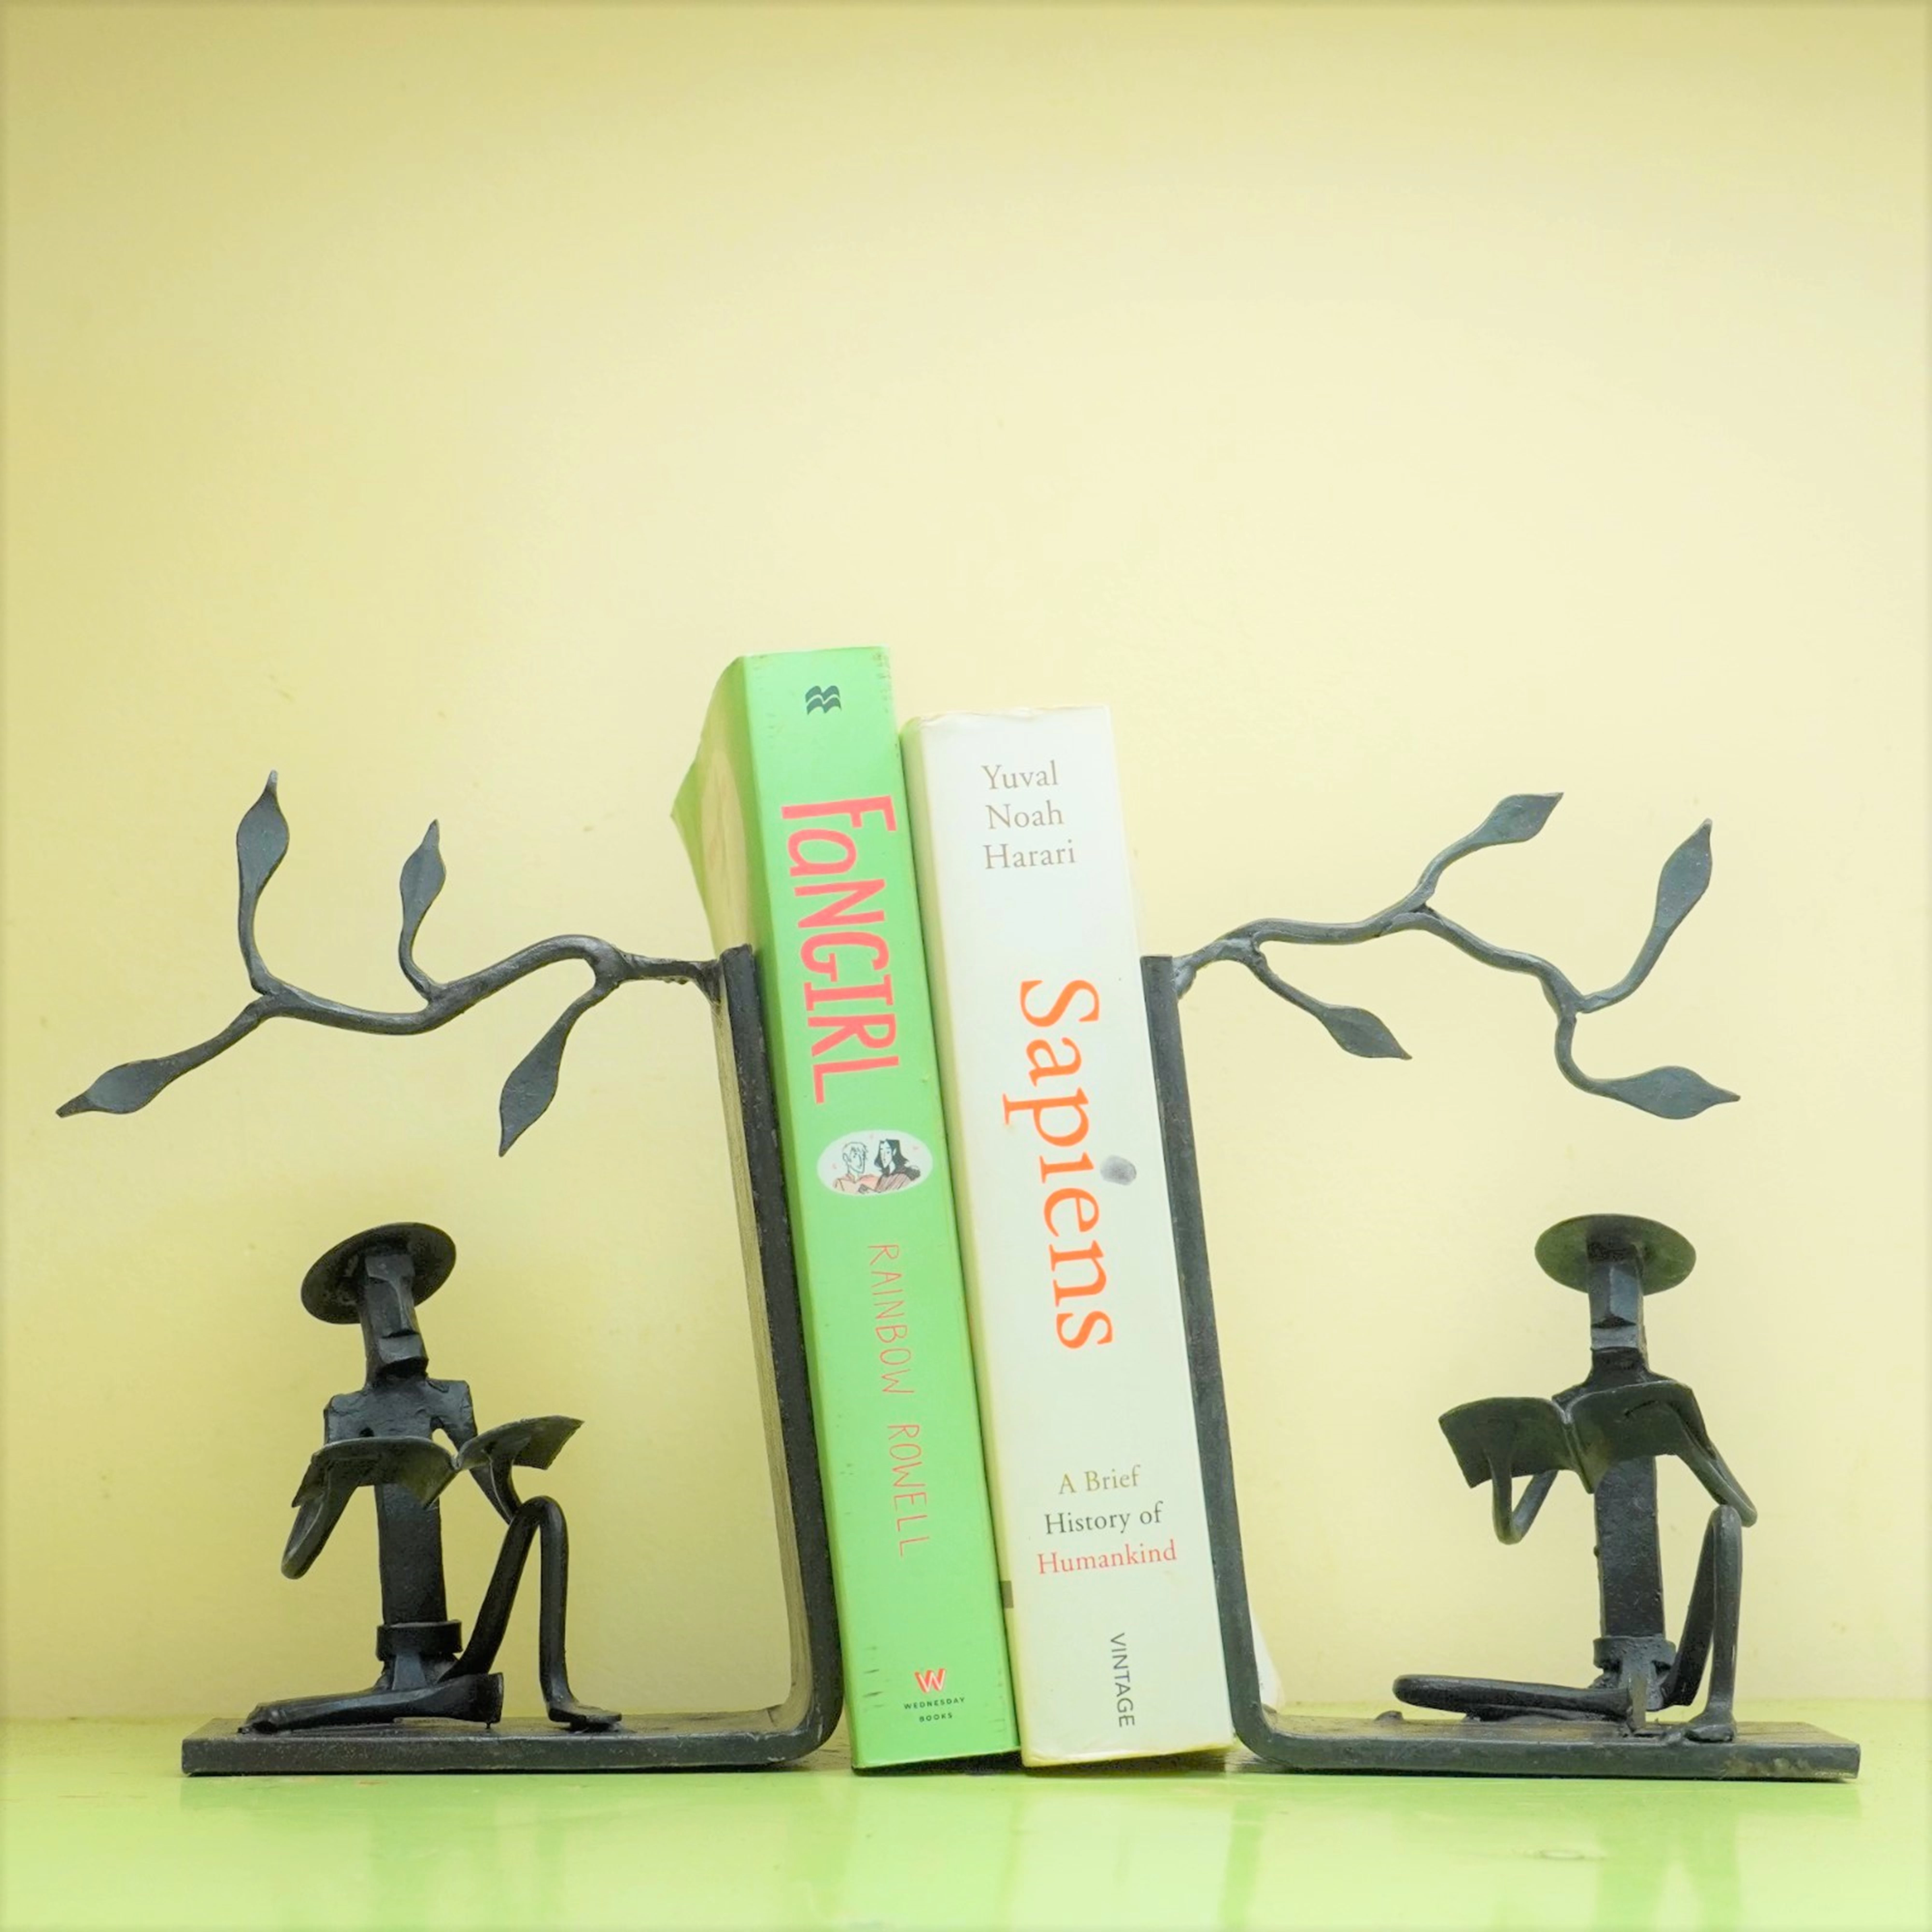 2PCS Bookends Iron Book Stoppers Book Dividers Metal Book Ends Heavy Duty Booken